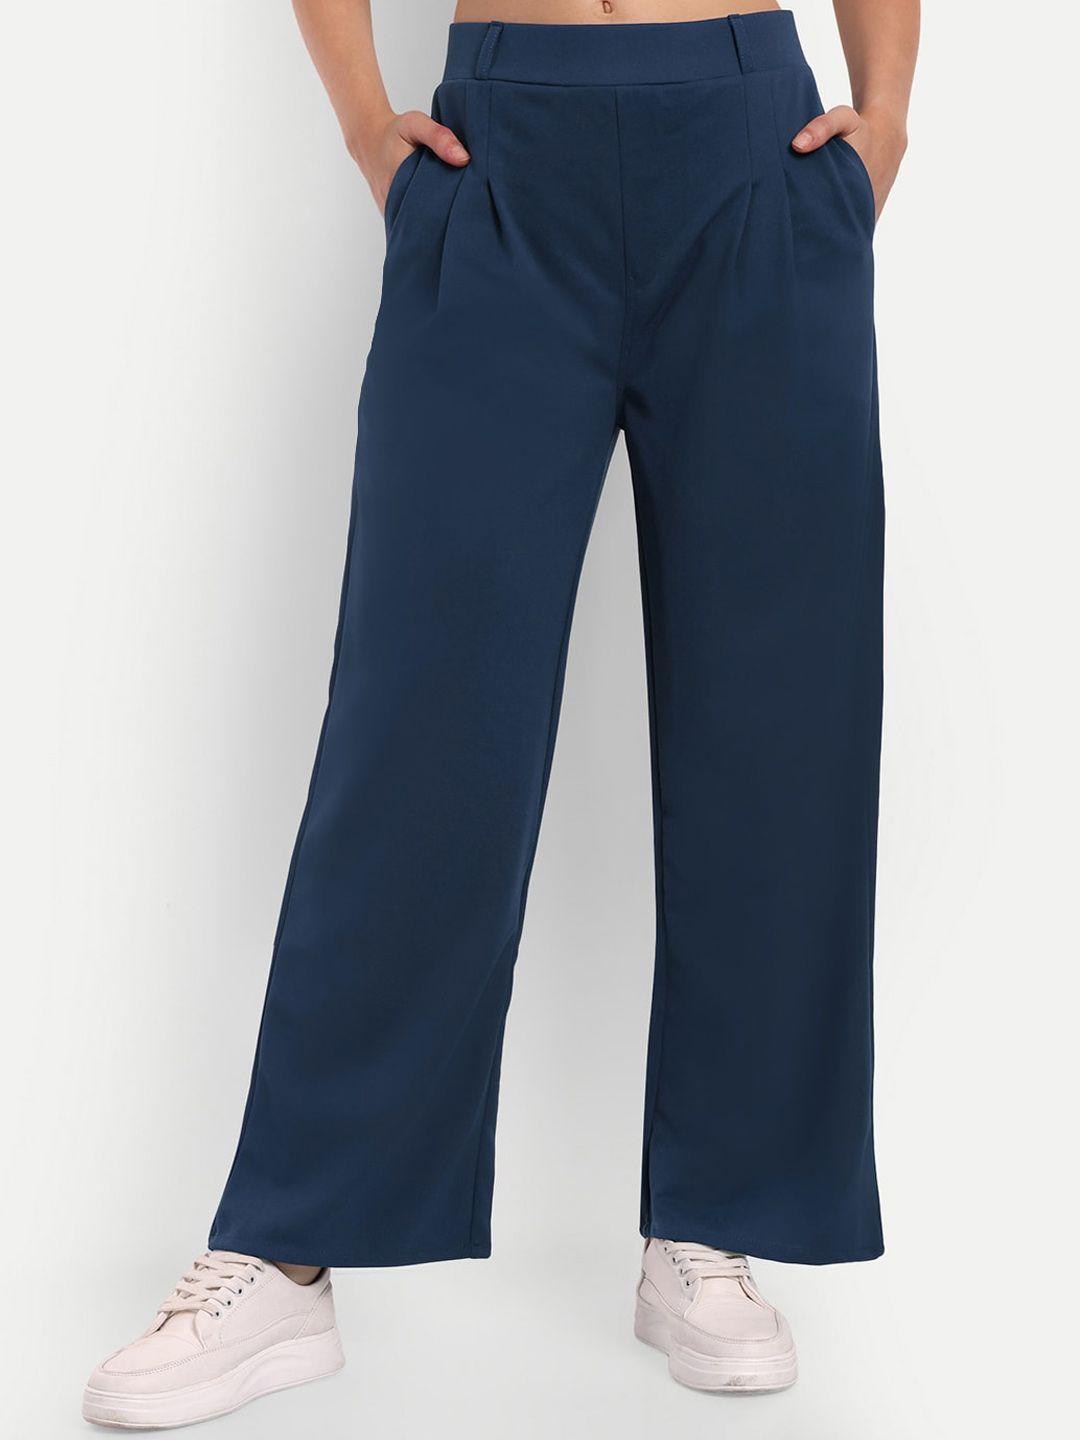 next-one-women-navy-blue-smart-loose-fit-high-rise-easy-wash-pleated-trousers